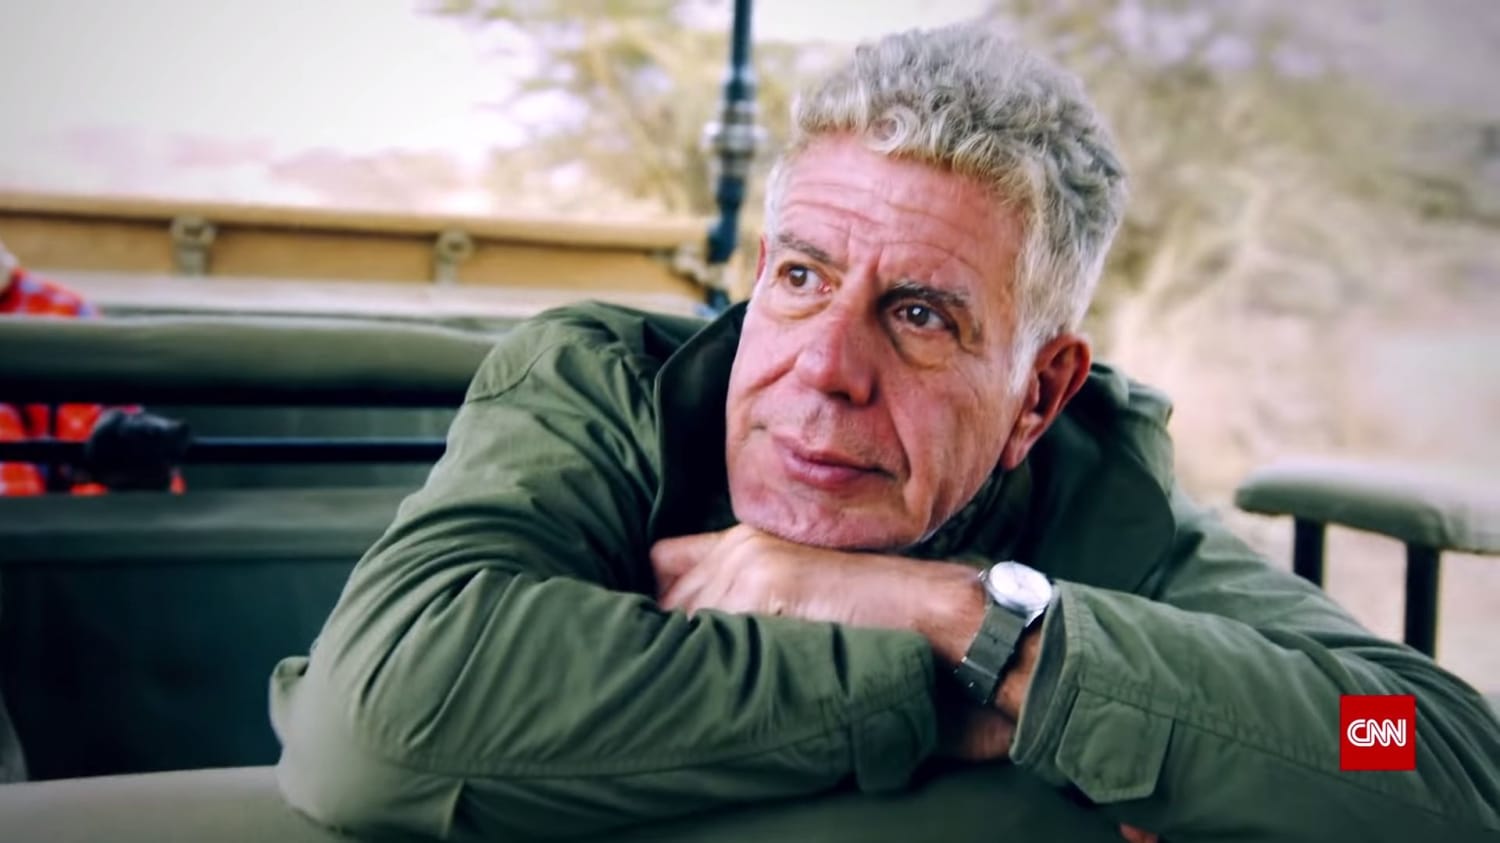 An Anthony Bourdain Documentary Is on the Way